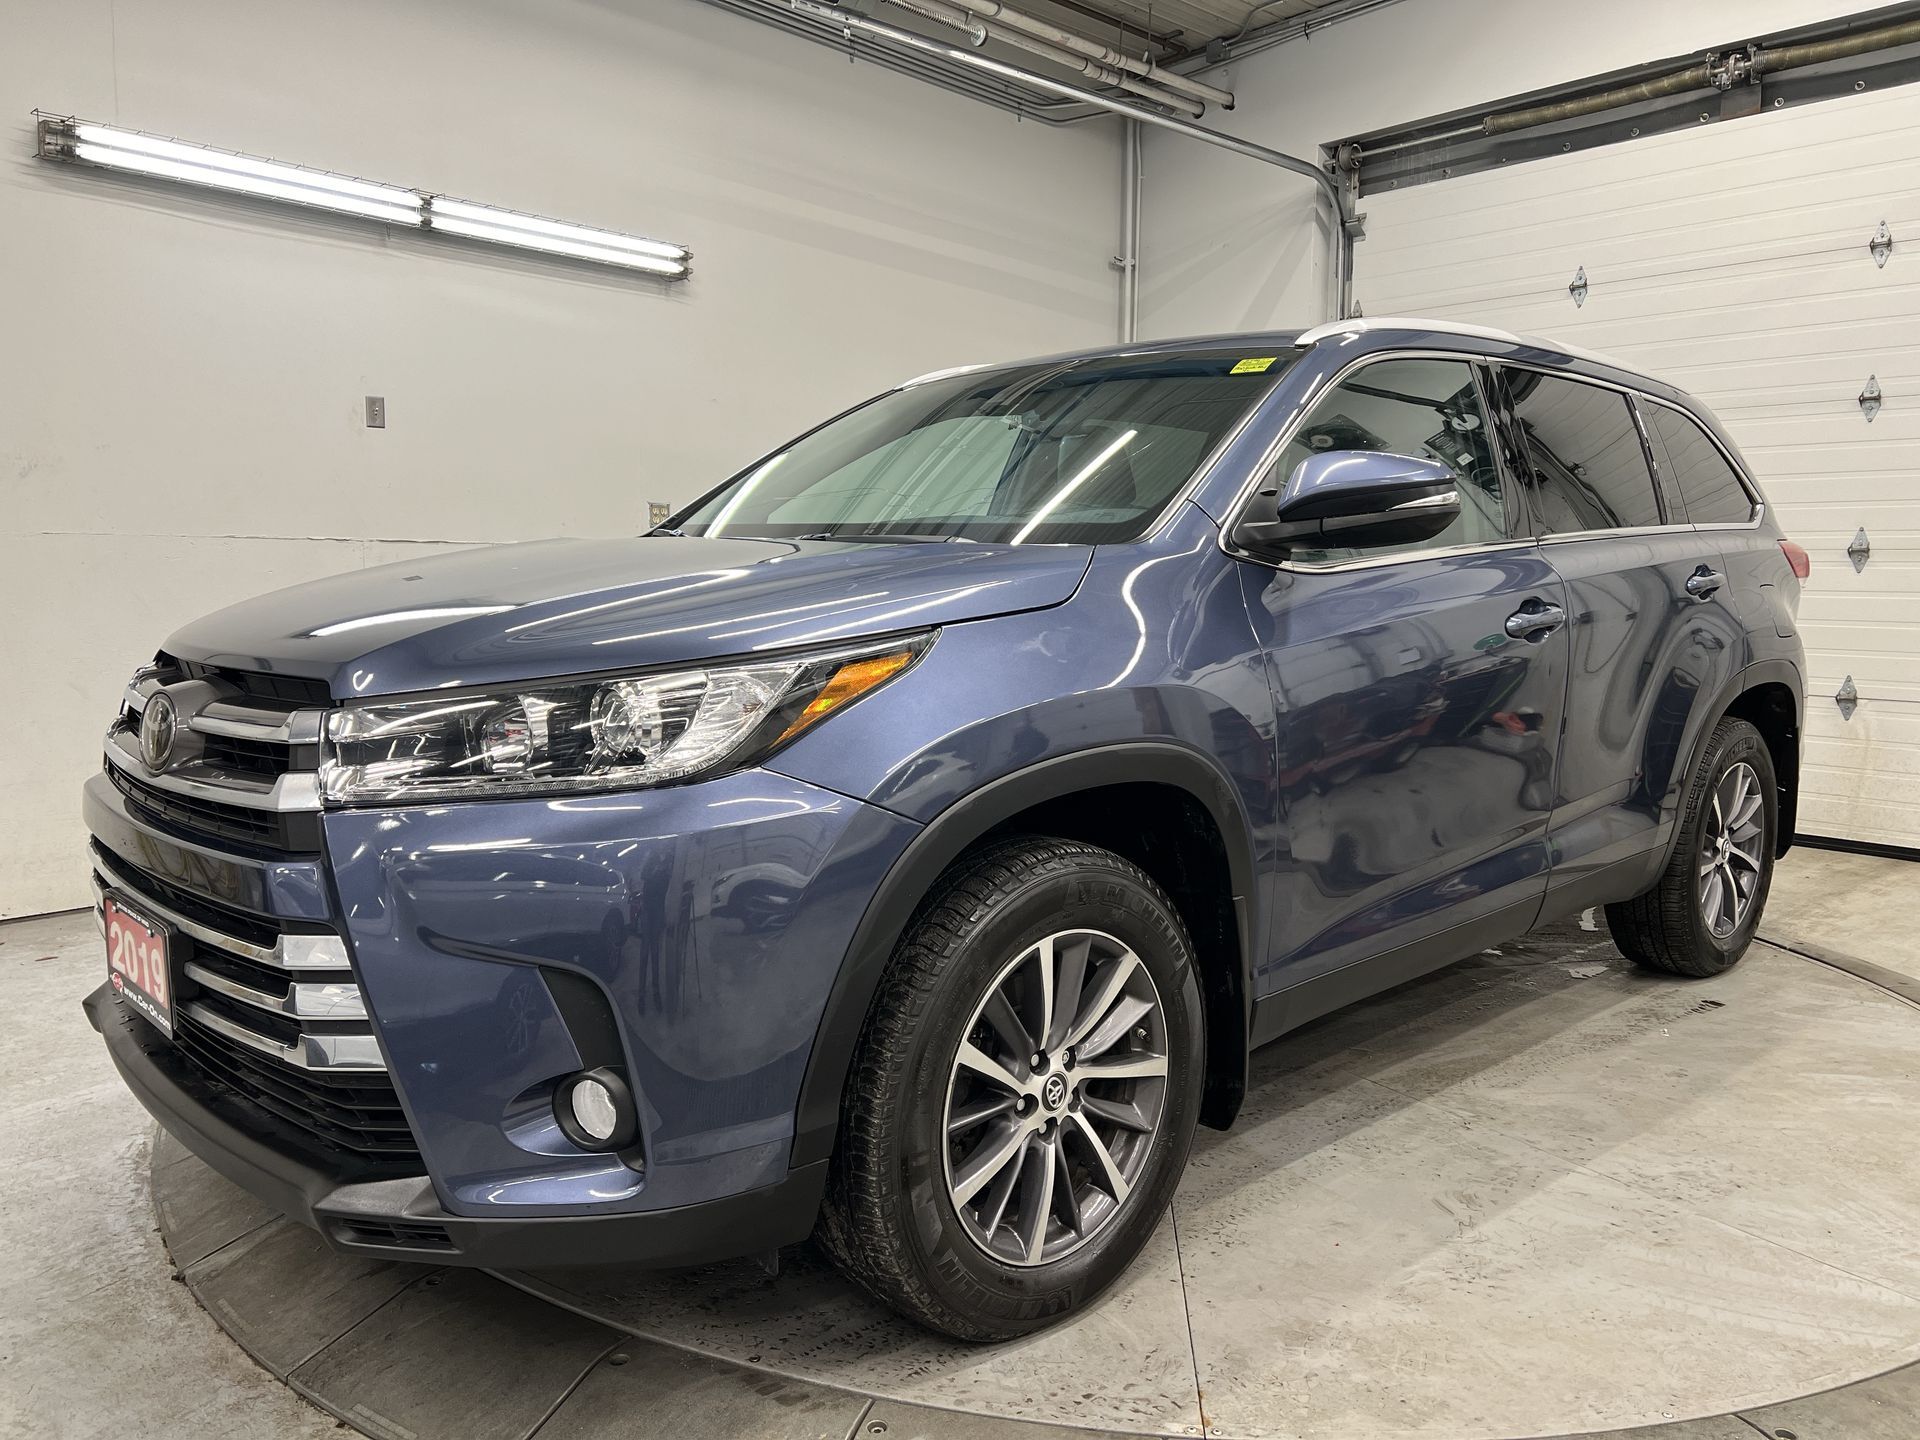 2019 Toyota Highlander XLE AWD| 8-PASS | LOW KMS! | SUNROOF | HTD LEATHER